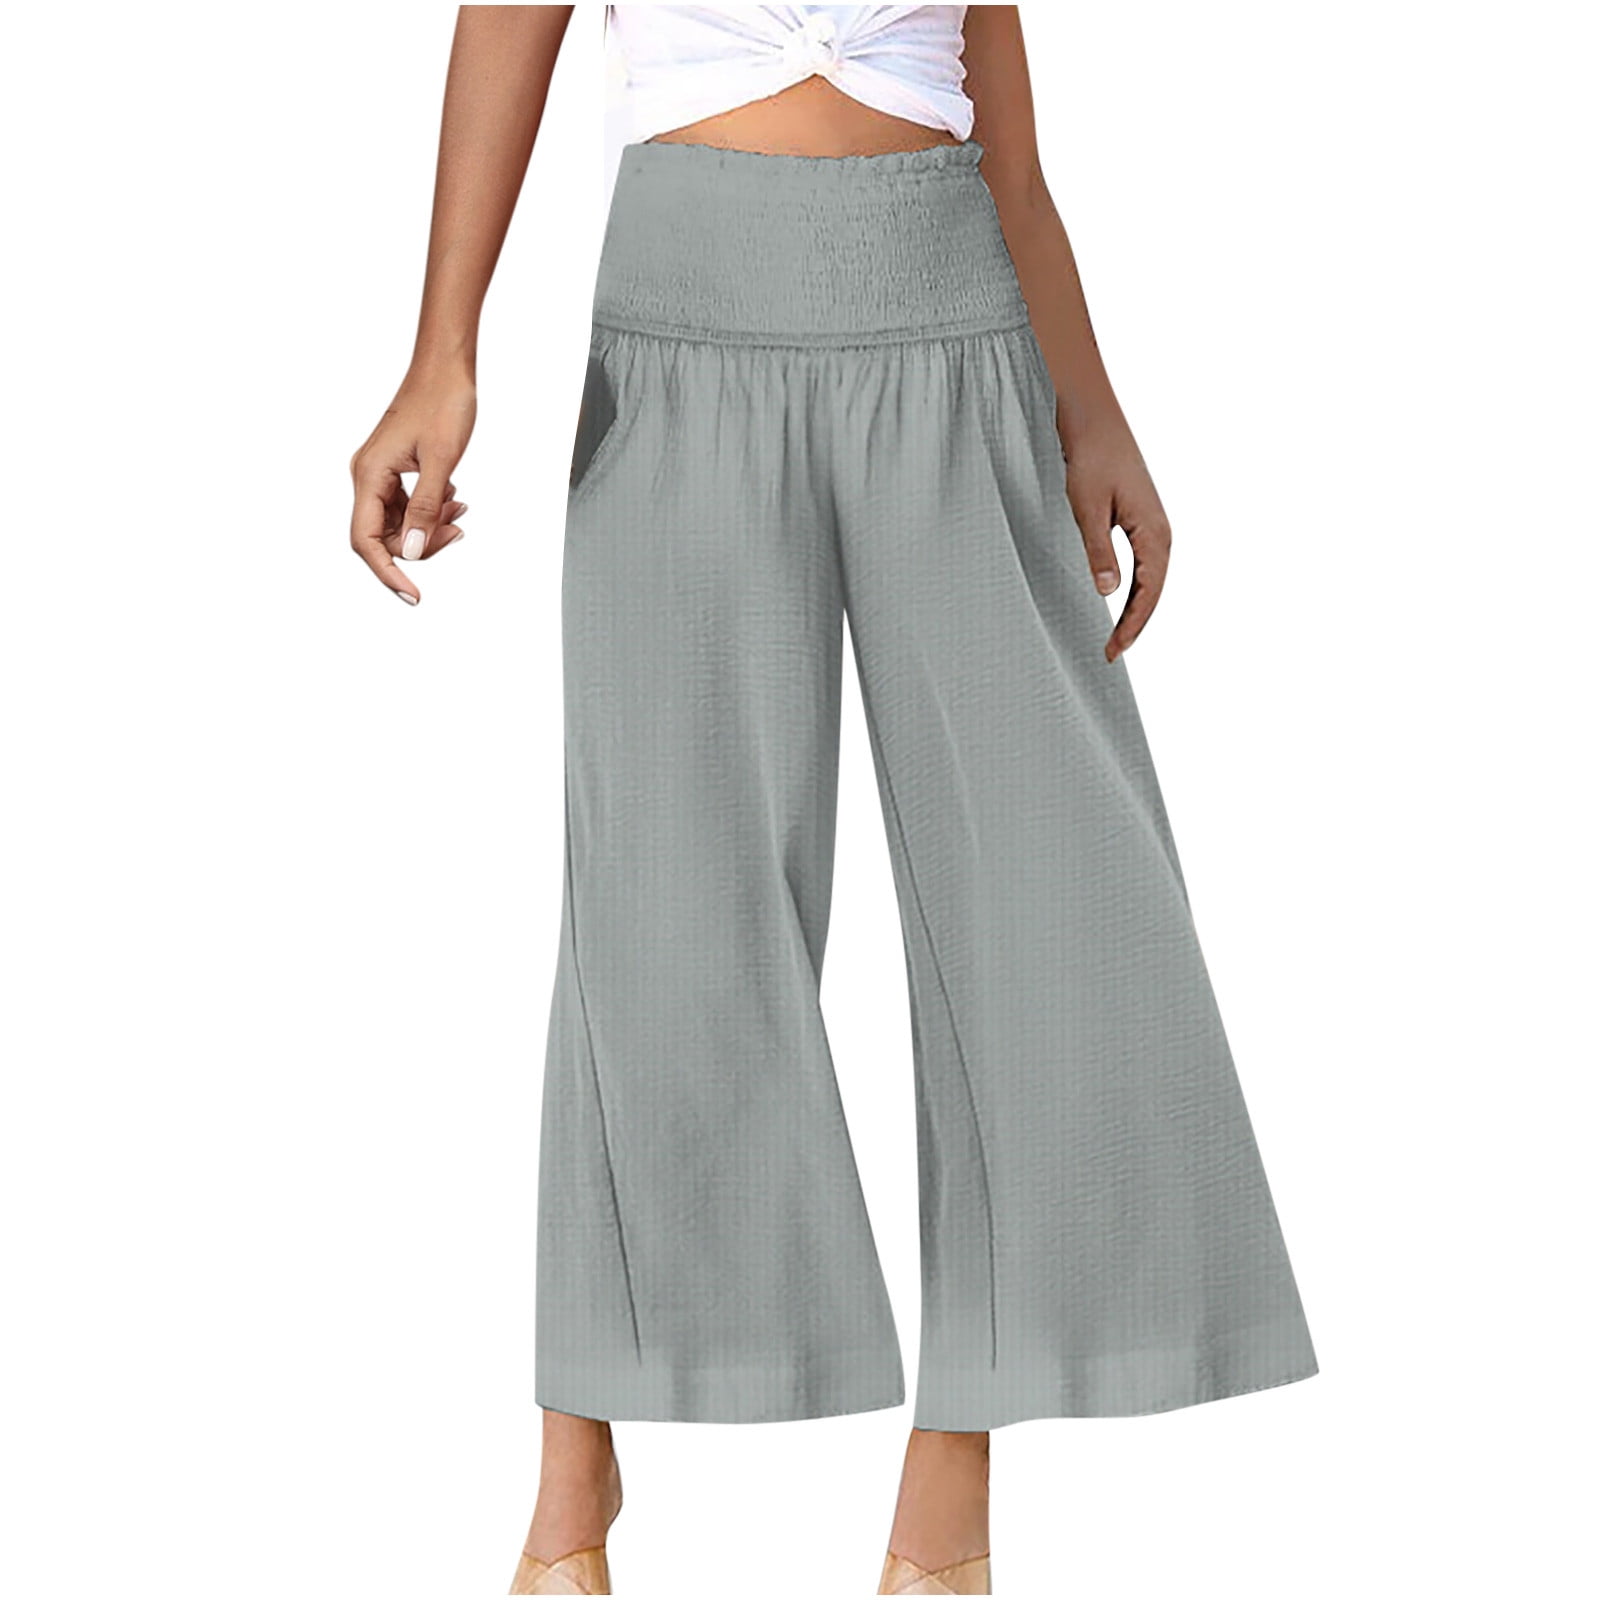 Wide Leg Pants for Women Summer Solid Color High Waist Stretch